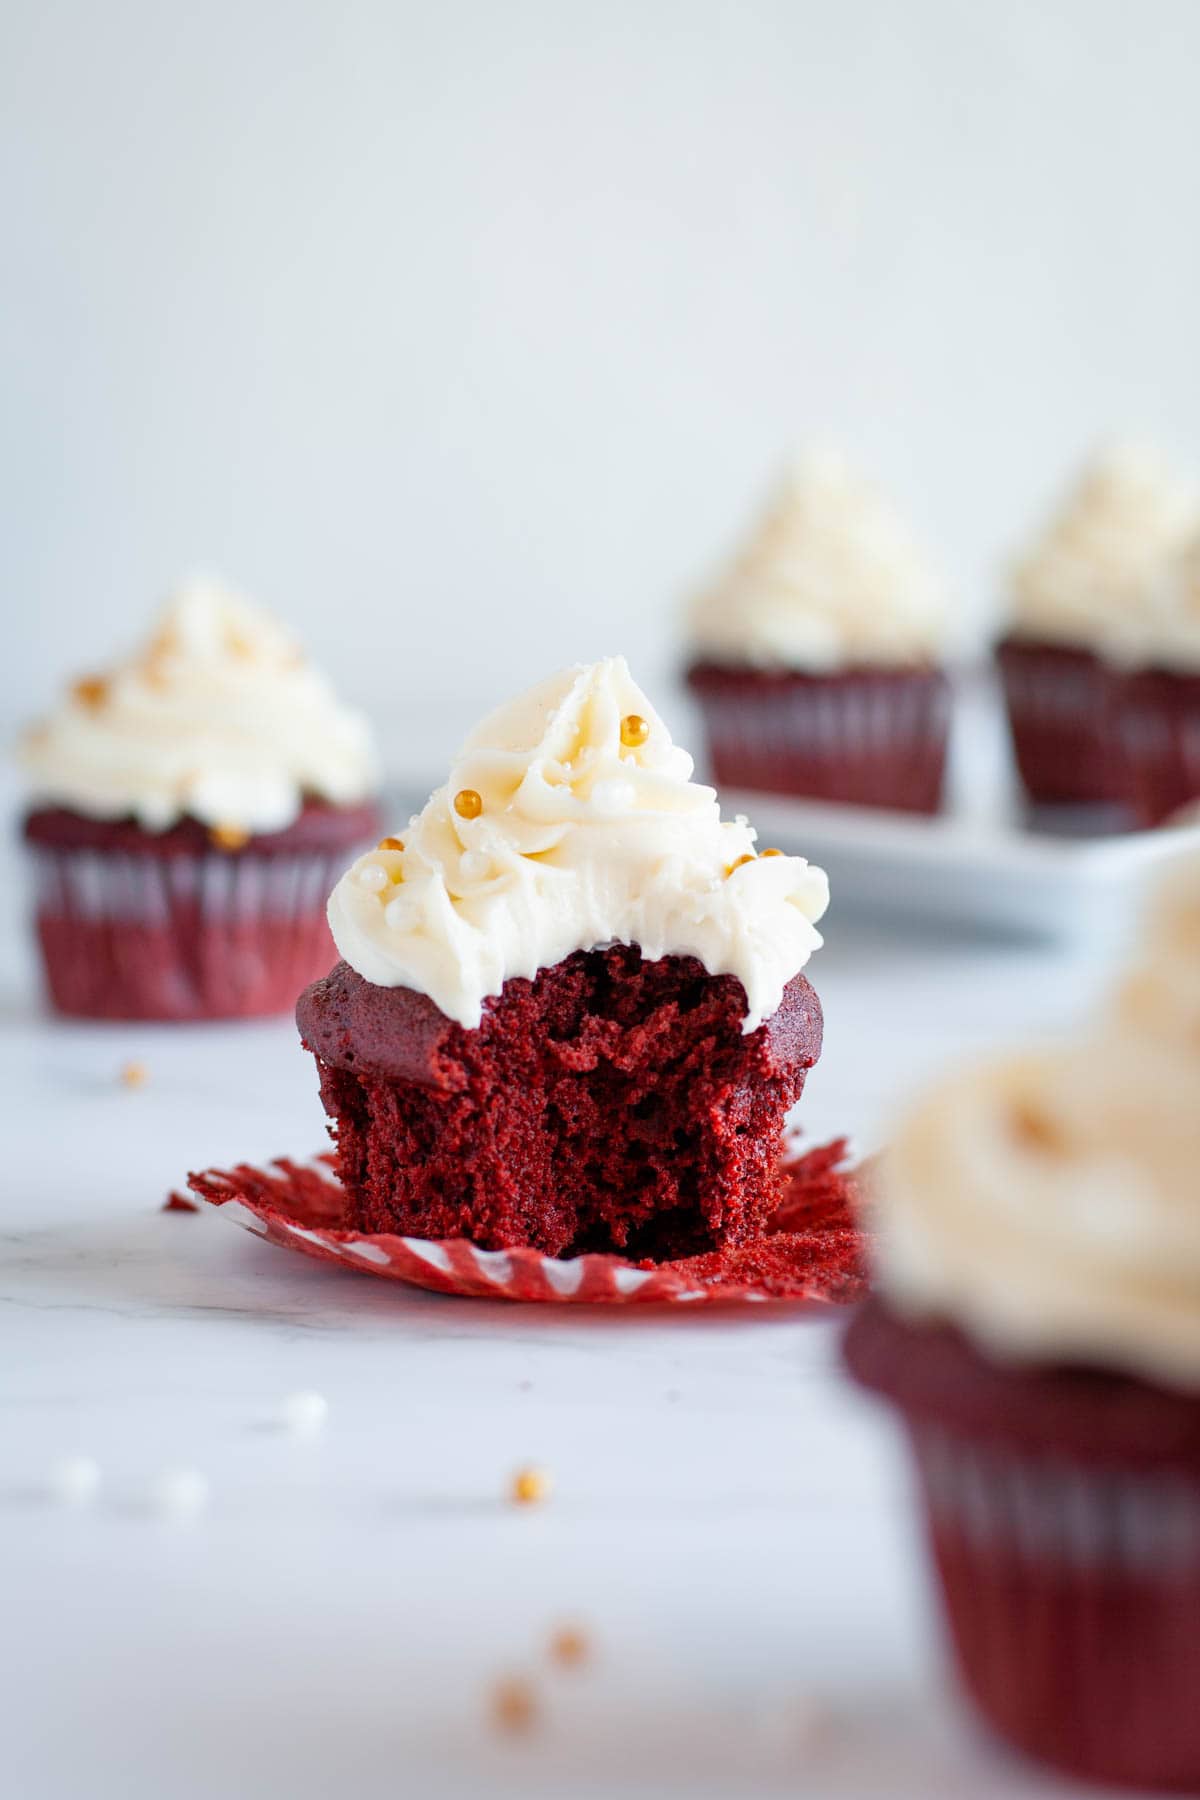 Featured image of a bite taken out of the gluten free red velvet cupcake with cream cheese frosting